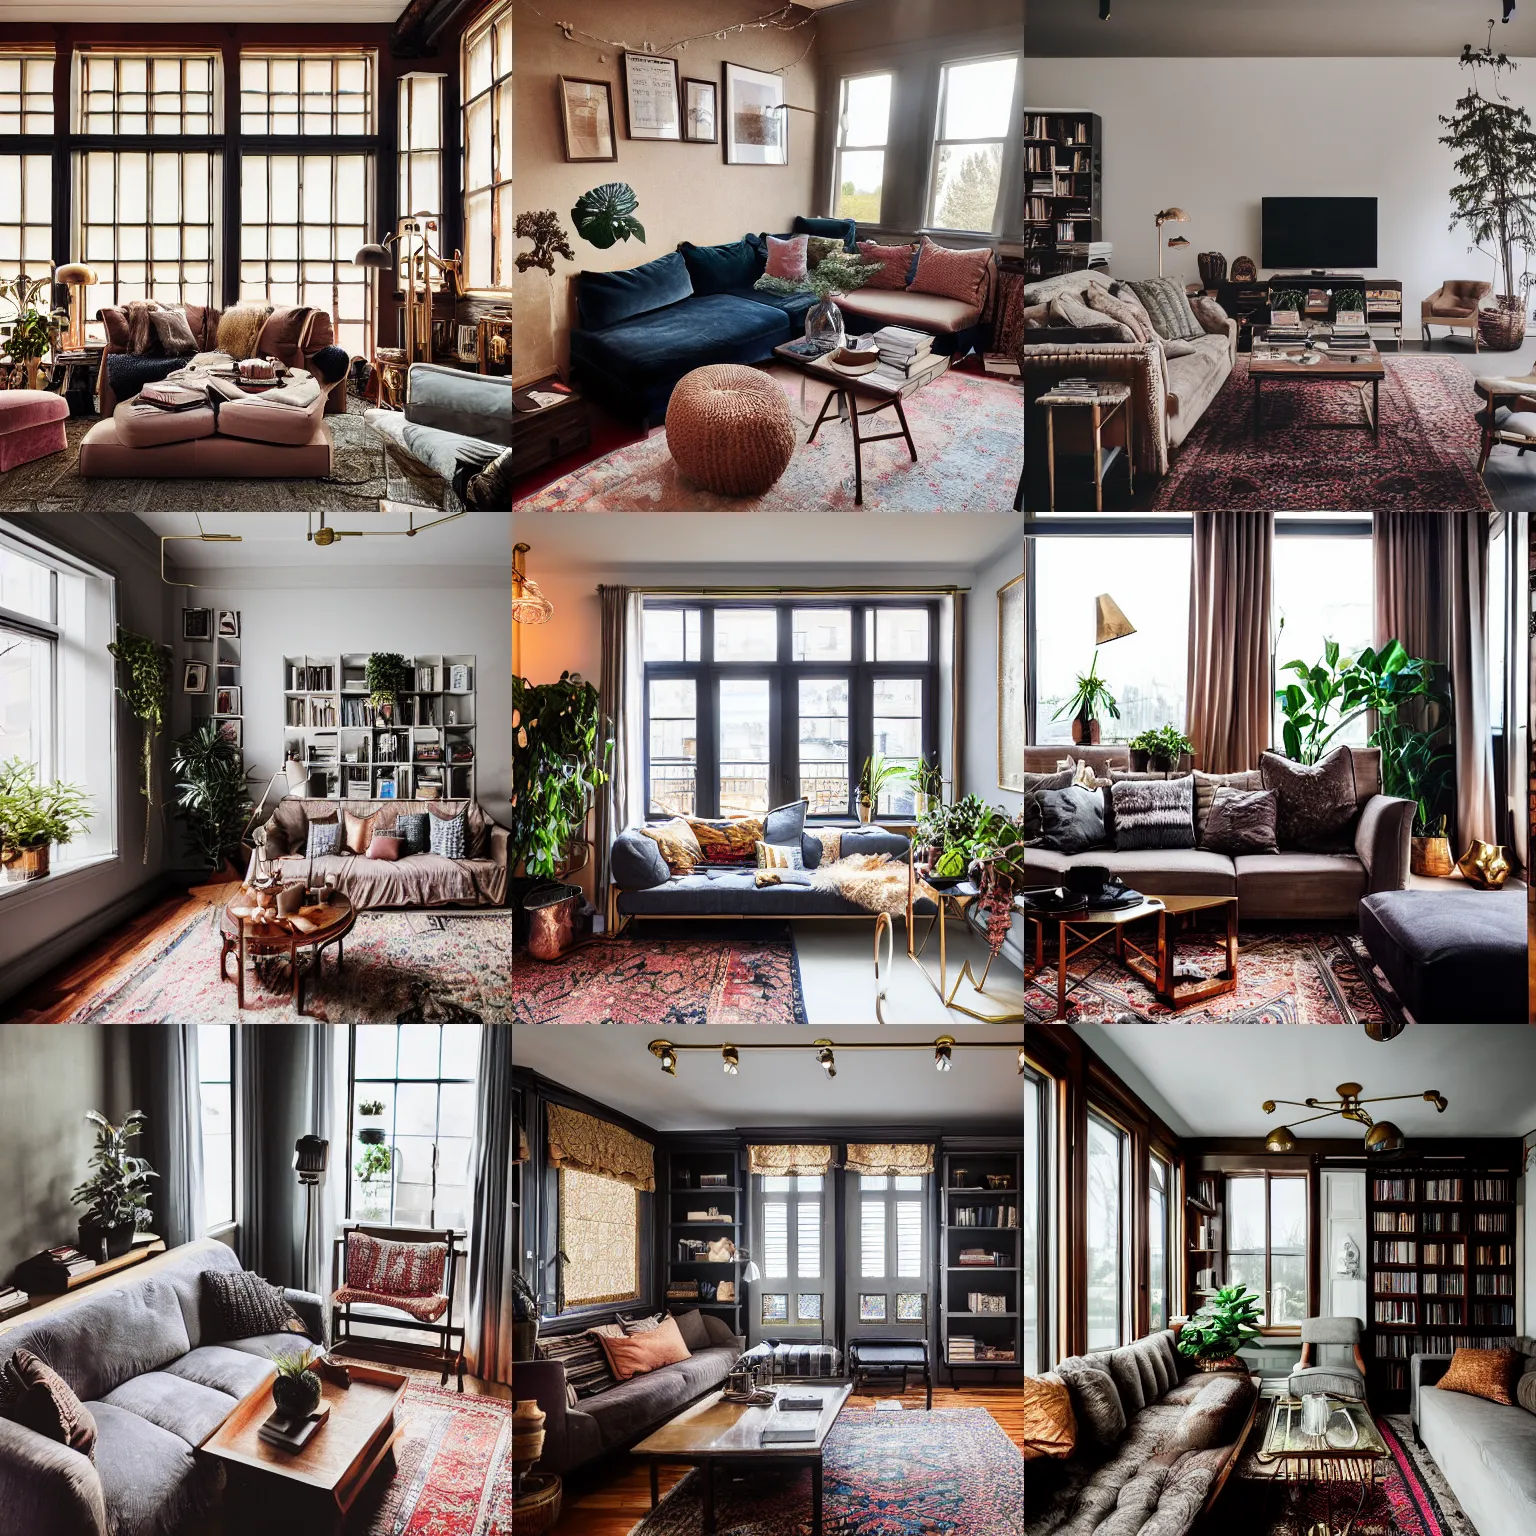 Prompt: insanely detailed wide angle photograph, atmospheric, award winning interior design living room, dusk, cozy and calm, fabrics and textiles, colorful accents, brass, copper, secluded, many light sources, lamps, hardwood floors, book shelf, couch, desk, balcony door, plants